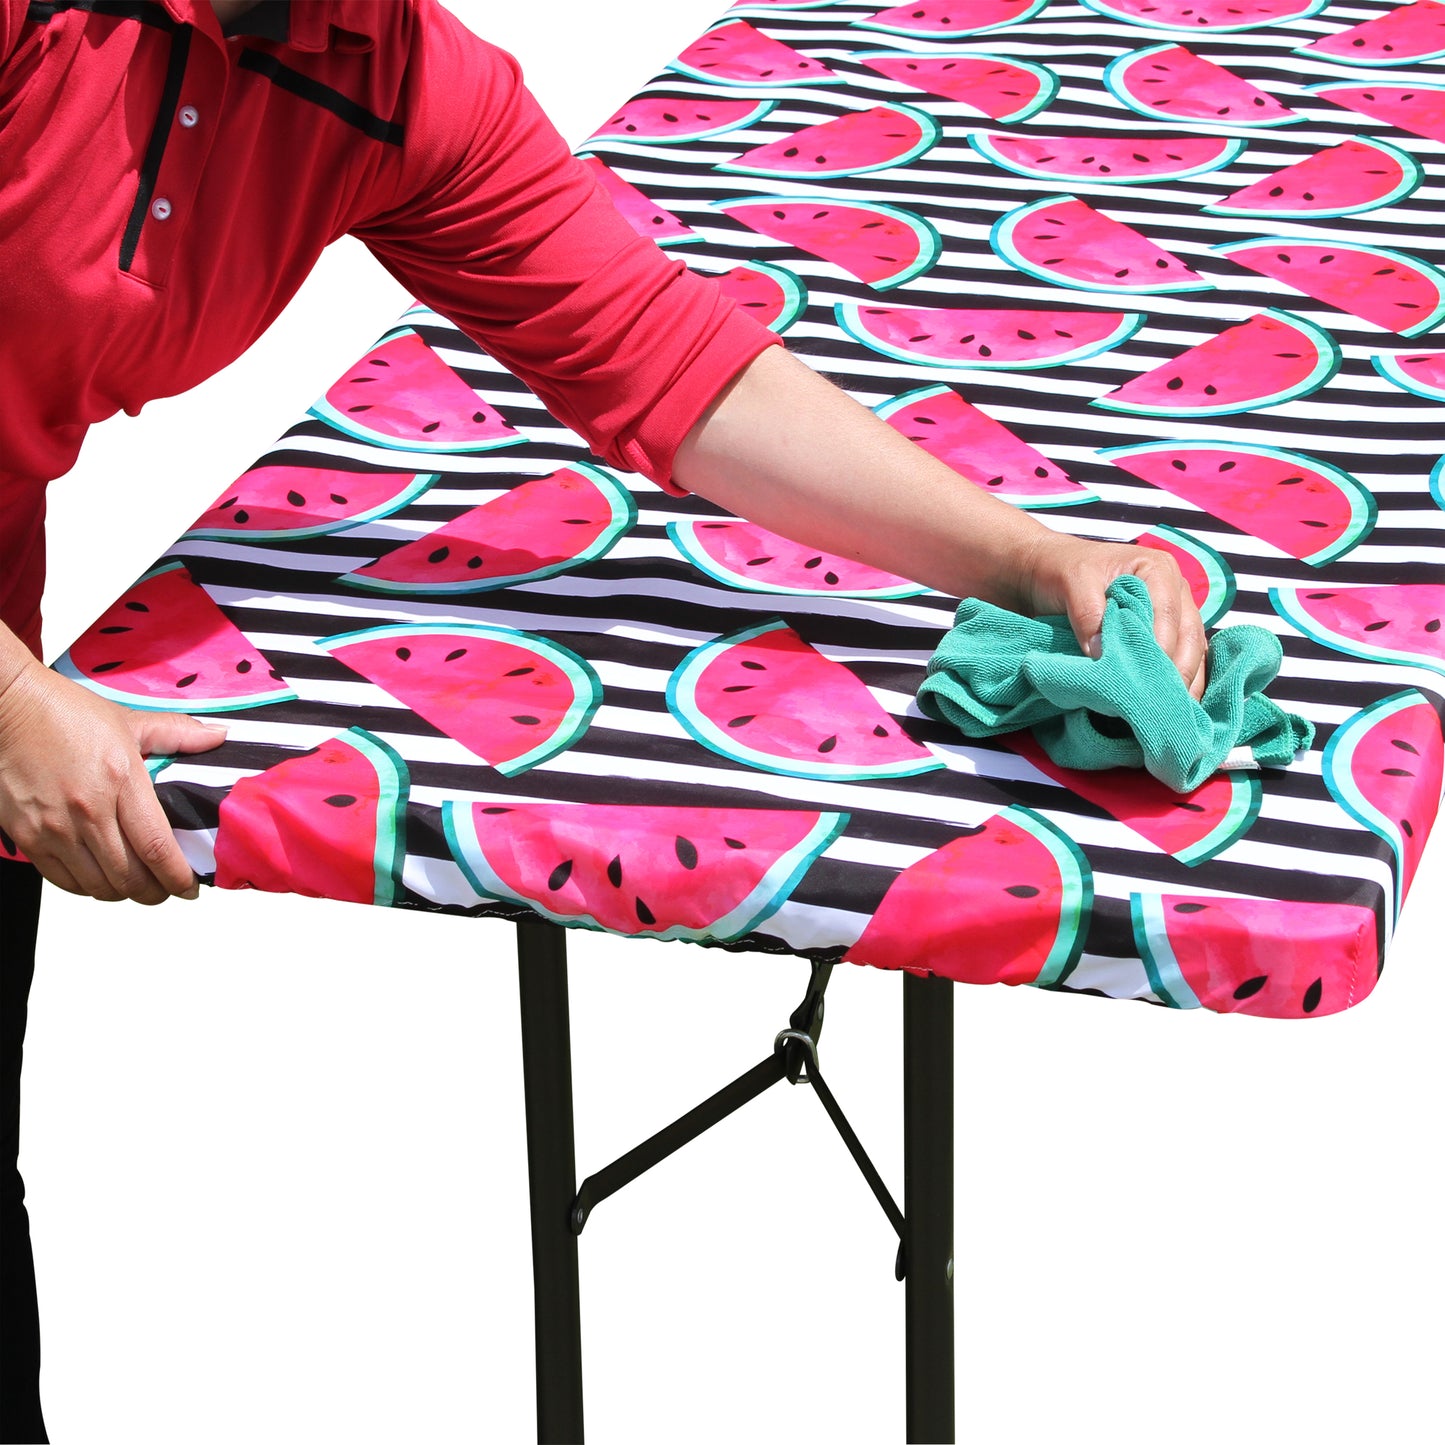 TableCloth PLUS 72" Watermelon Fitted PEVA Vinyl Tablecloth for 6' Folding Tables can be wiped clean with a cloth